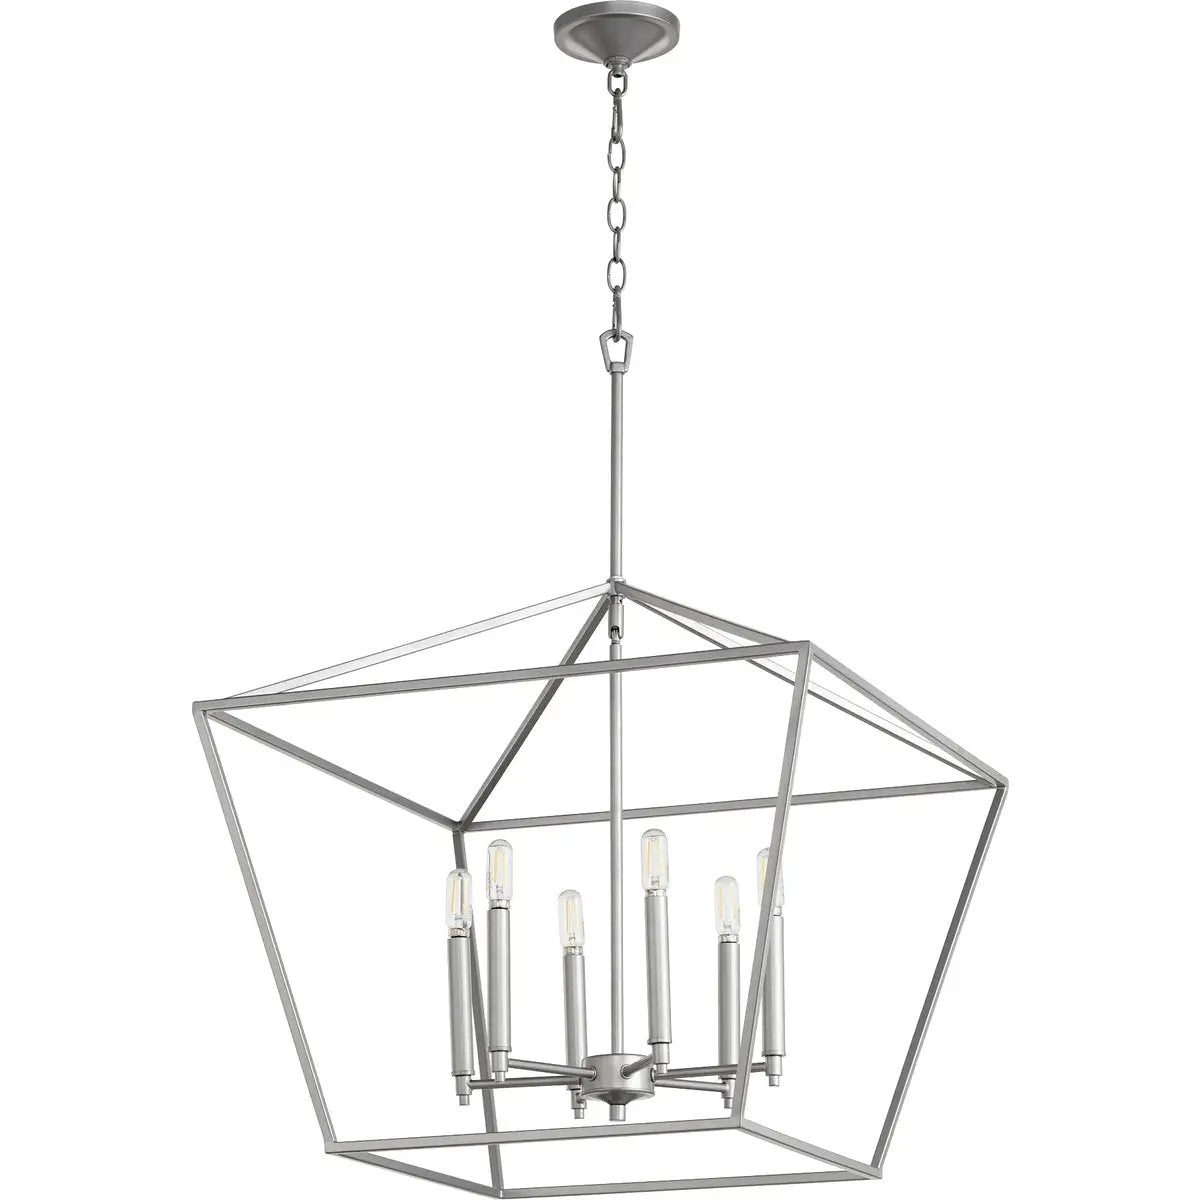 A farmhouse pendant light with a metal frame and open tapered shade, perfect for adding farmhouse charm to your space. Fits candelabra bulbs and provides ample illumination. Ideal for foyers, hallways, or kitchens. Dimensions: 24"W x 23"H. Brand: Quorum International.